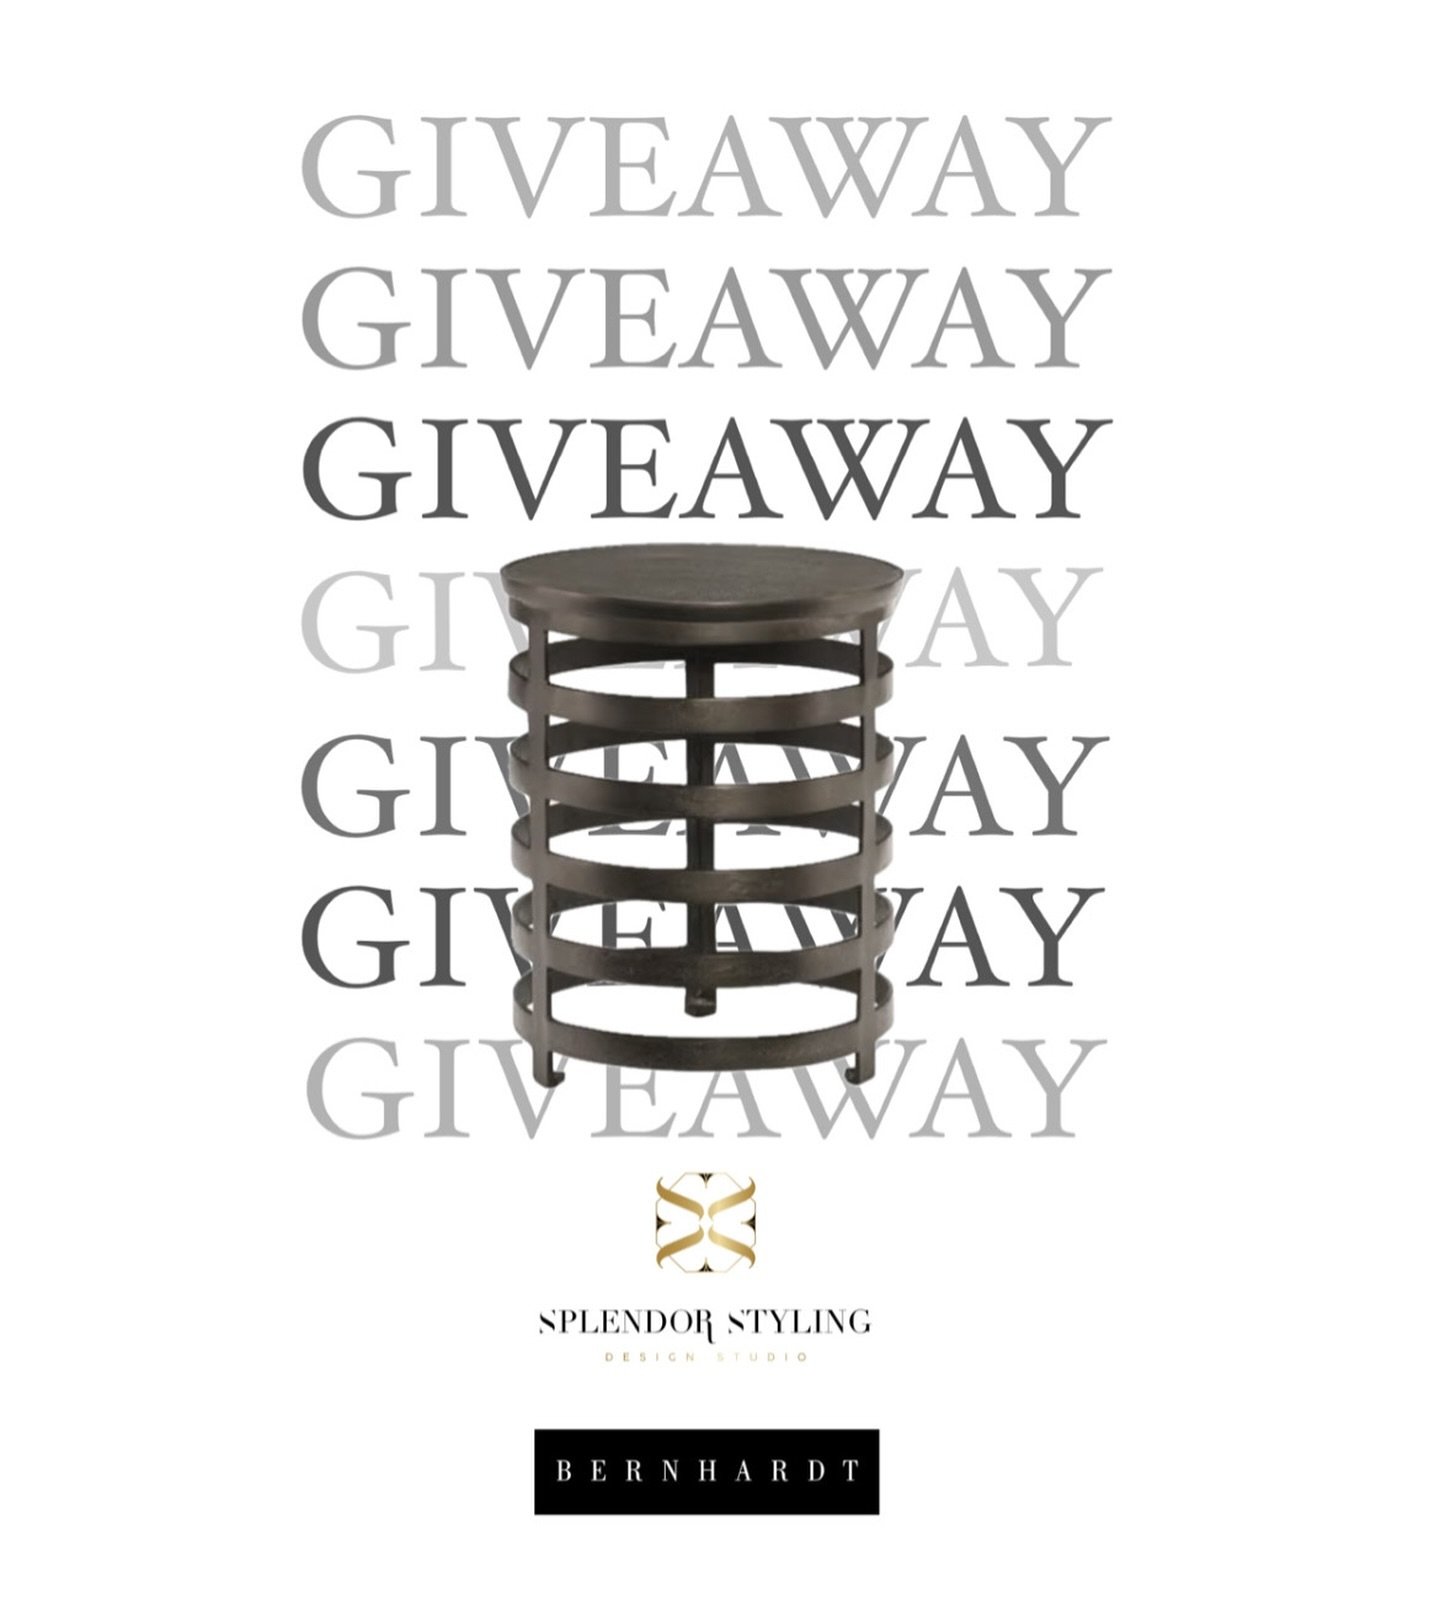 ⚡️Giveaway Alert ⚡️

Splendor Styling is proud to be teaming up with one of our favorite luxury brands @bernhardtfurniture @bernhardt_midatlantic for a #giveaway to our lovely audience! &hearts;️&hearts;️

Bernhardt has been kind enough to gift one l